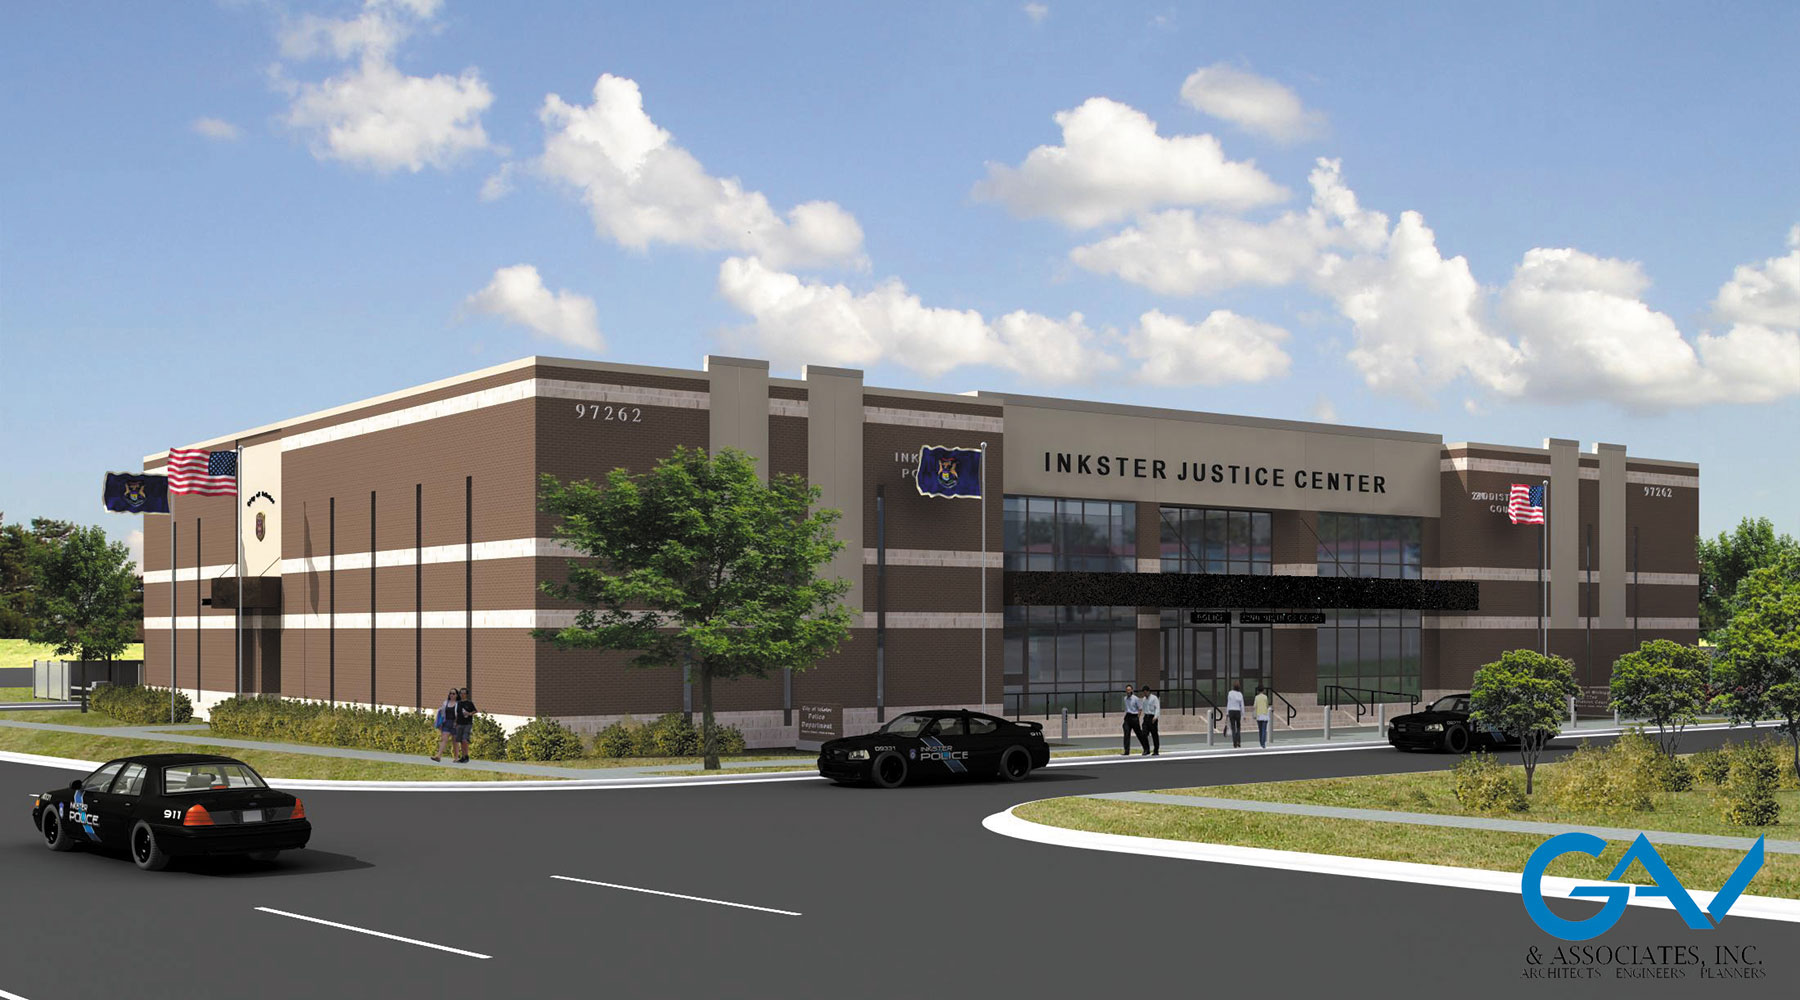 Inkster Justice Center